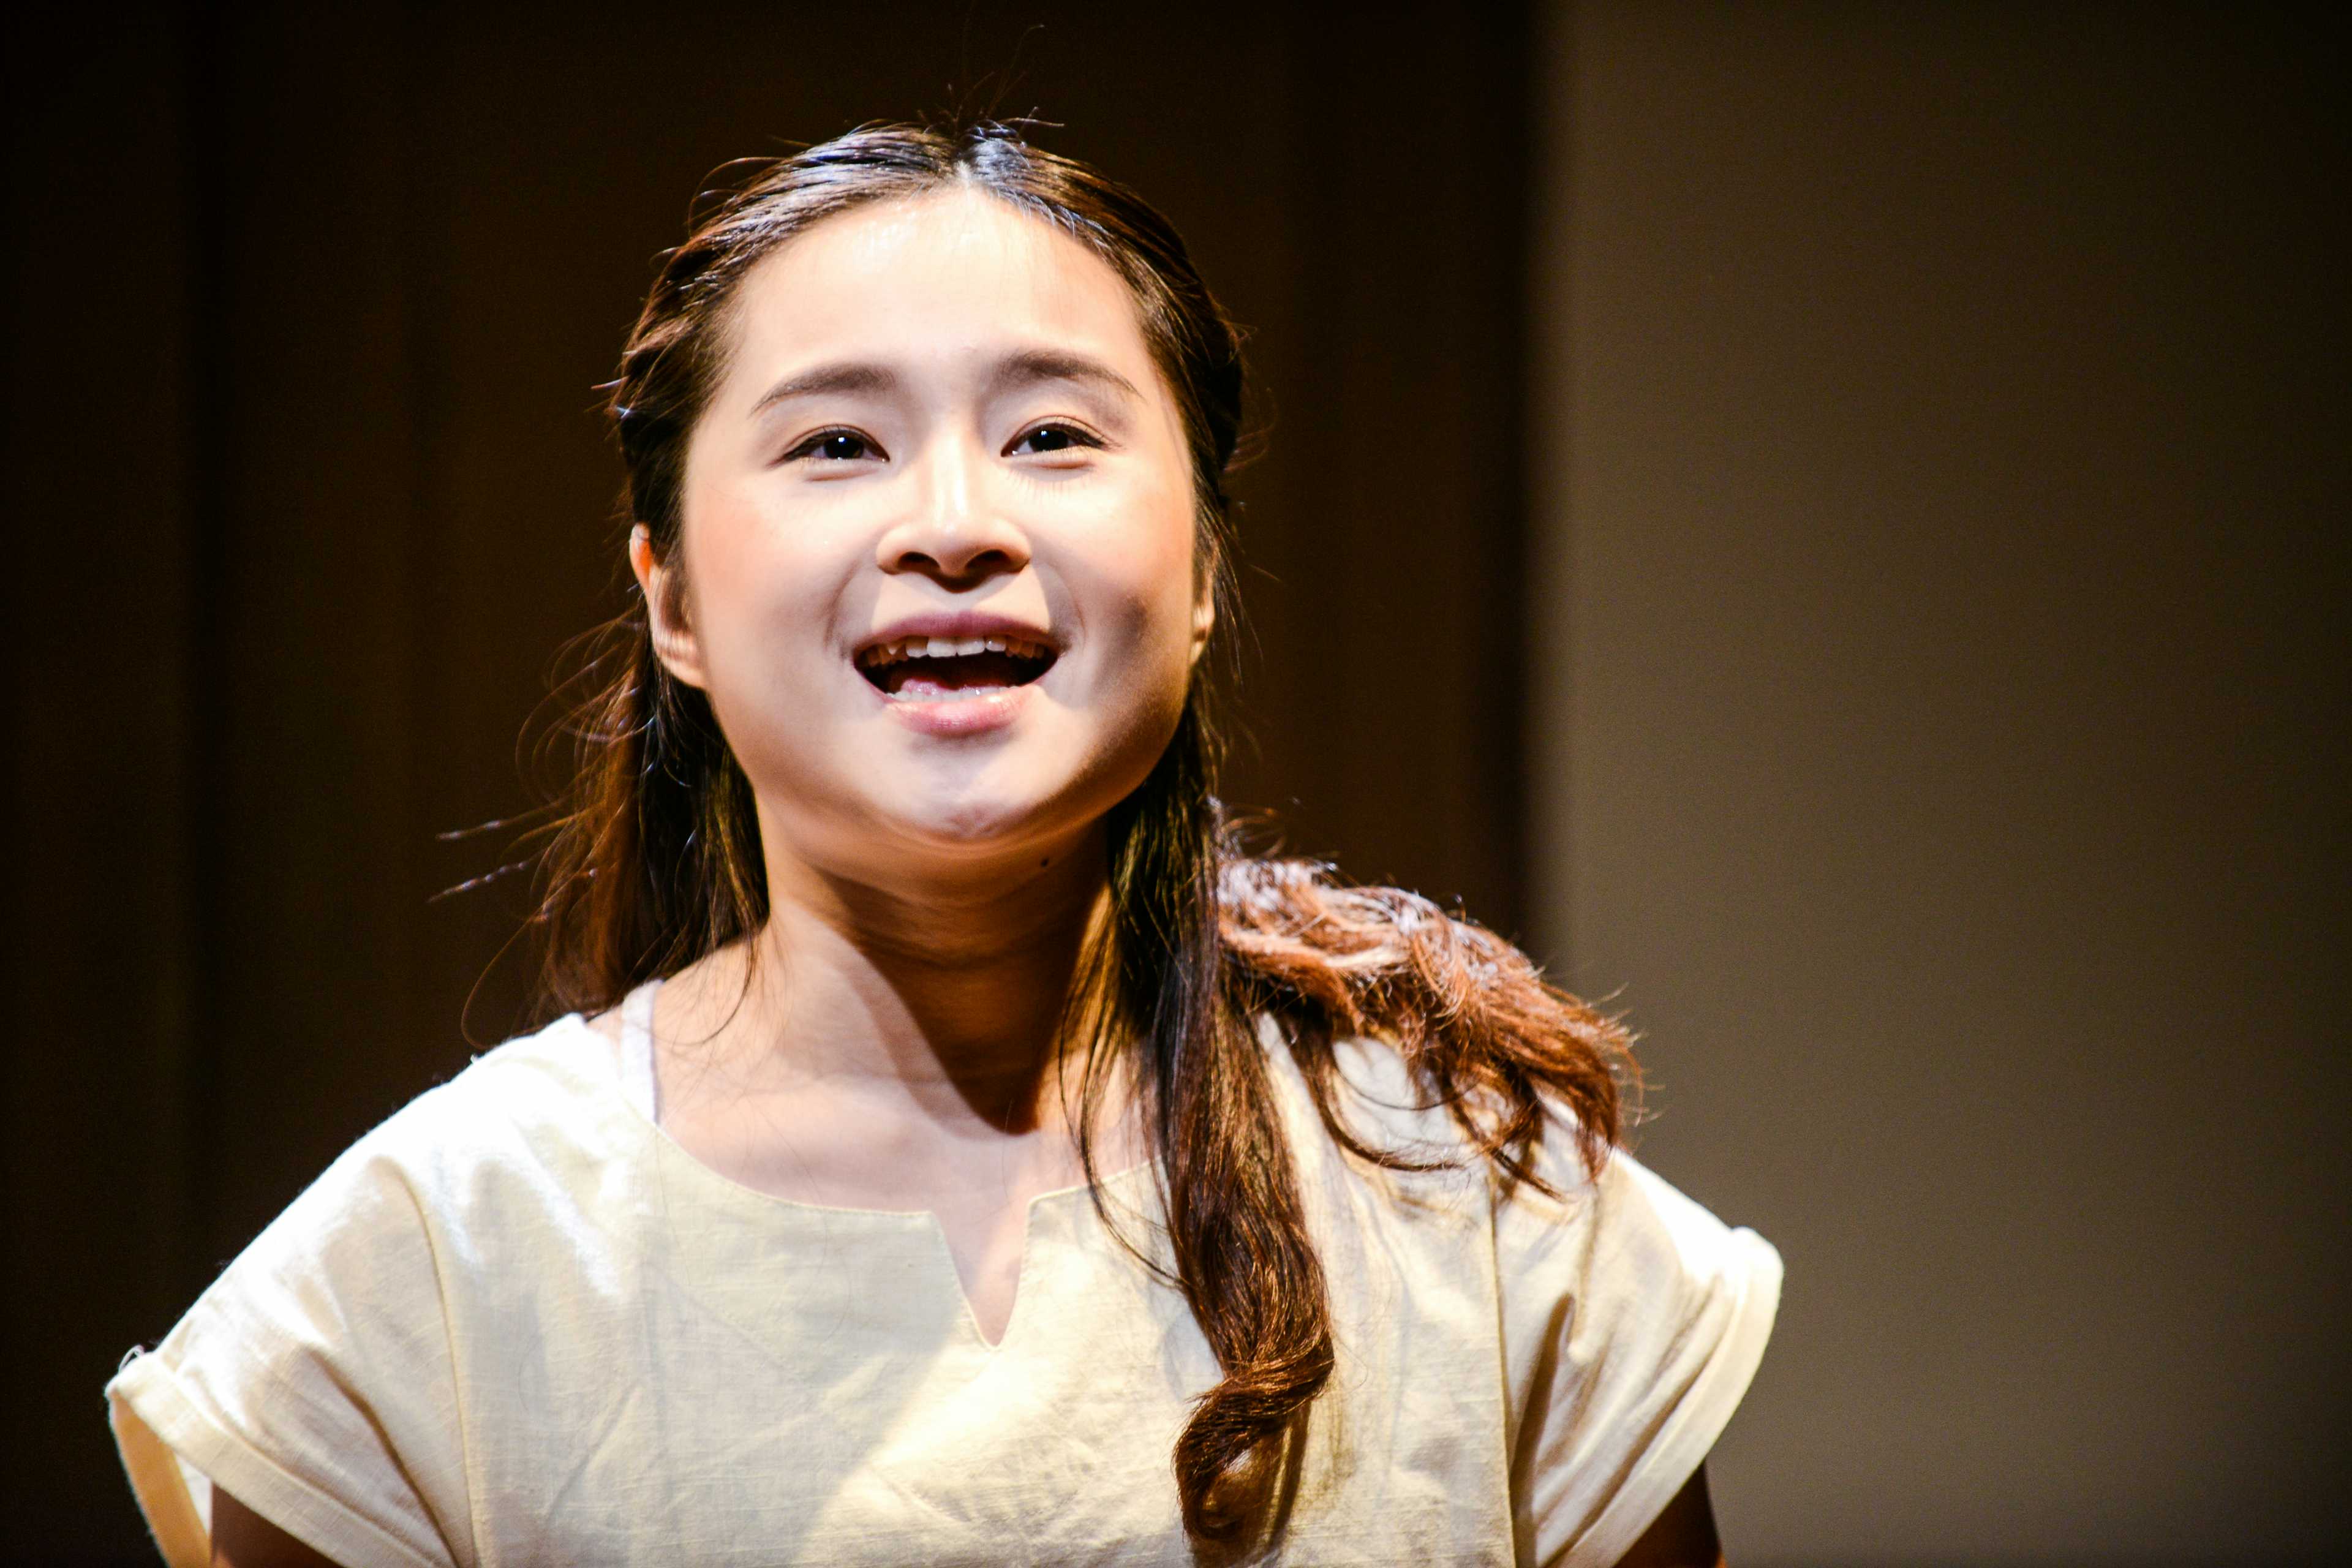 Milk and Honey | Featuring: Lung Jes | Tagged as: Milk and Honey, Show | Photo: Fung Wai Sun |  (Rooftop Productions • Hong Kong Theatre Company)  | Rooftop Productions • Hong Kong Theatre Company